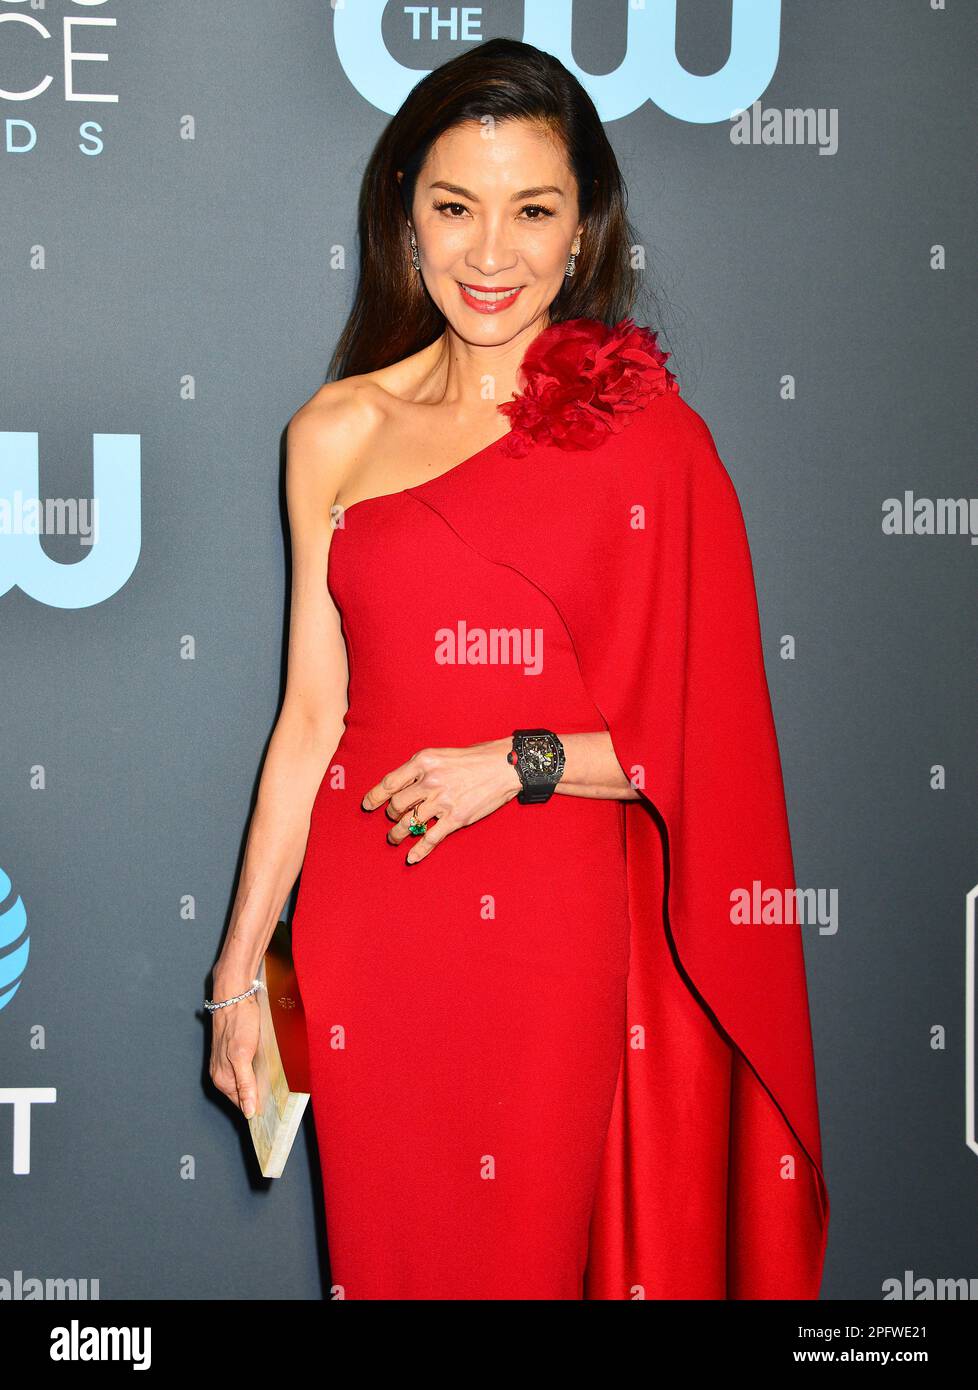 Michelle Yeoh 221  attends The 24th Annual Critics' Choice Awards at Barker Hangar on January 13, 2019 in Santa Monica, CaliforniaRichard Belzer, Comedian and Law & Order- SVU Mainstay, Dead at 78    © Tsuni / USA Michelle Yeoh 221 Stock Photo